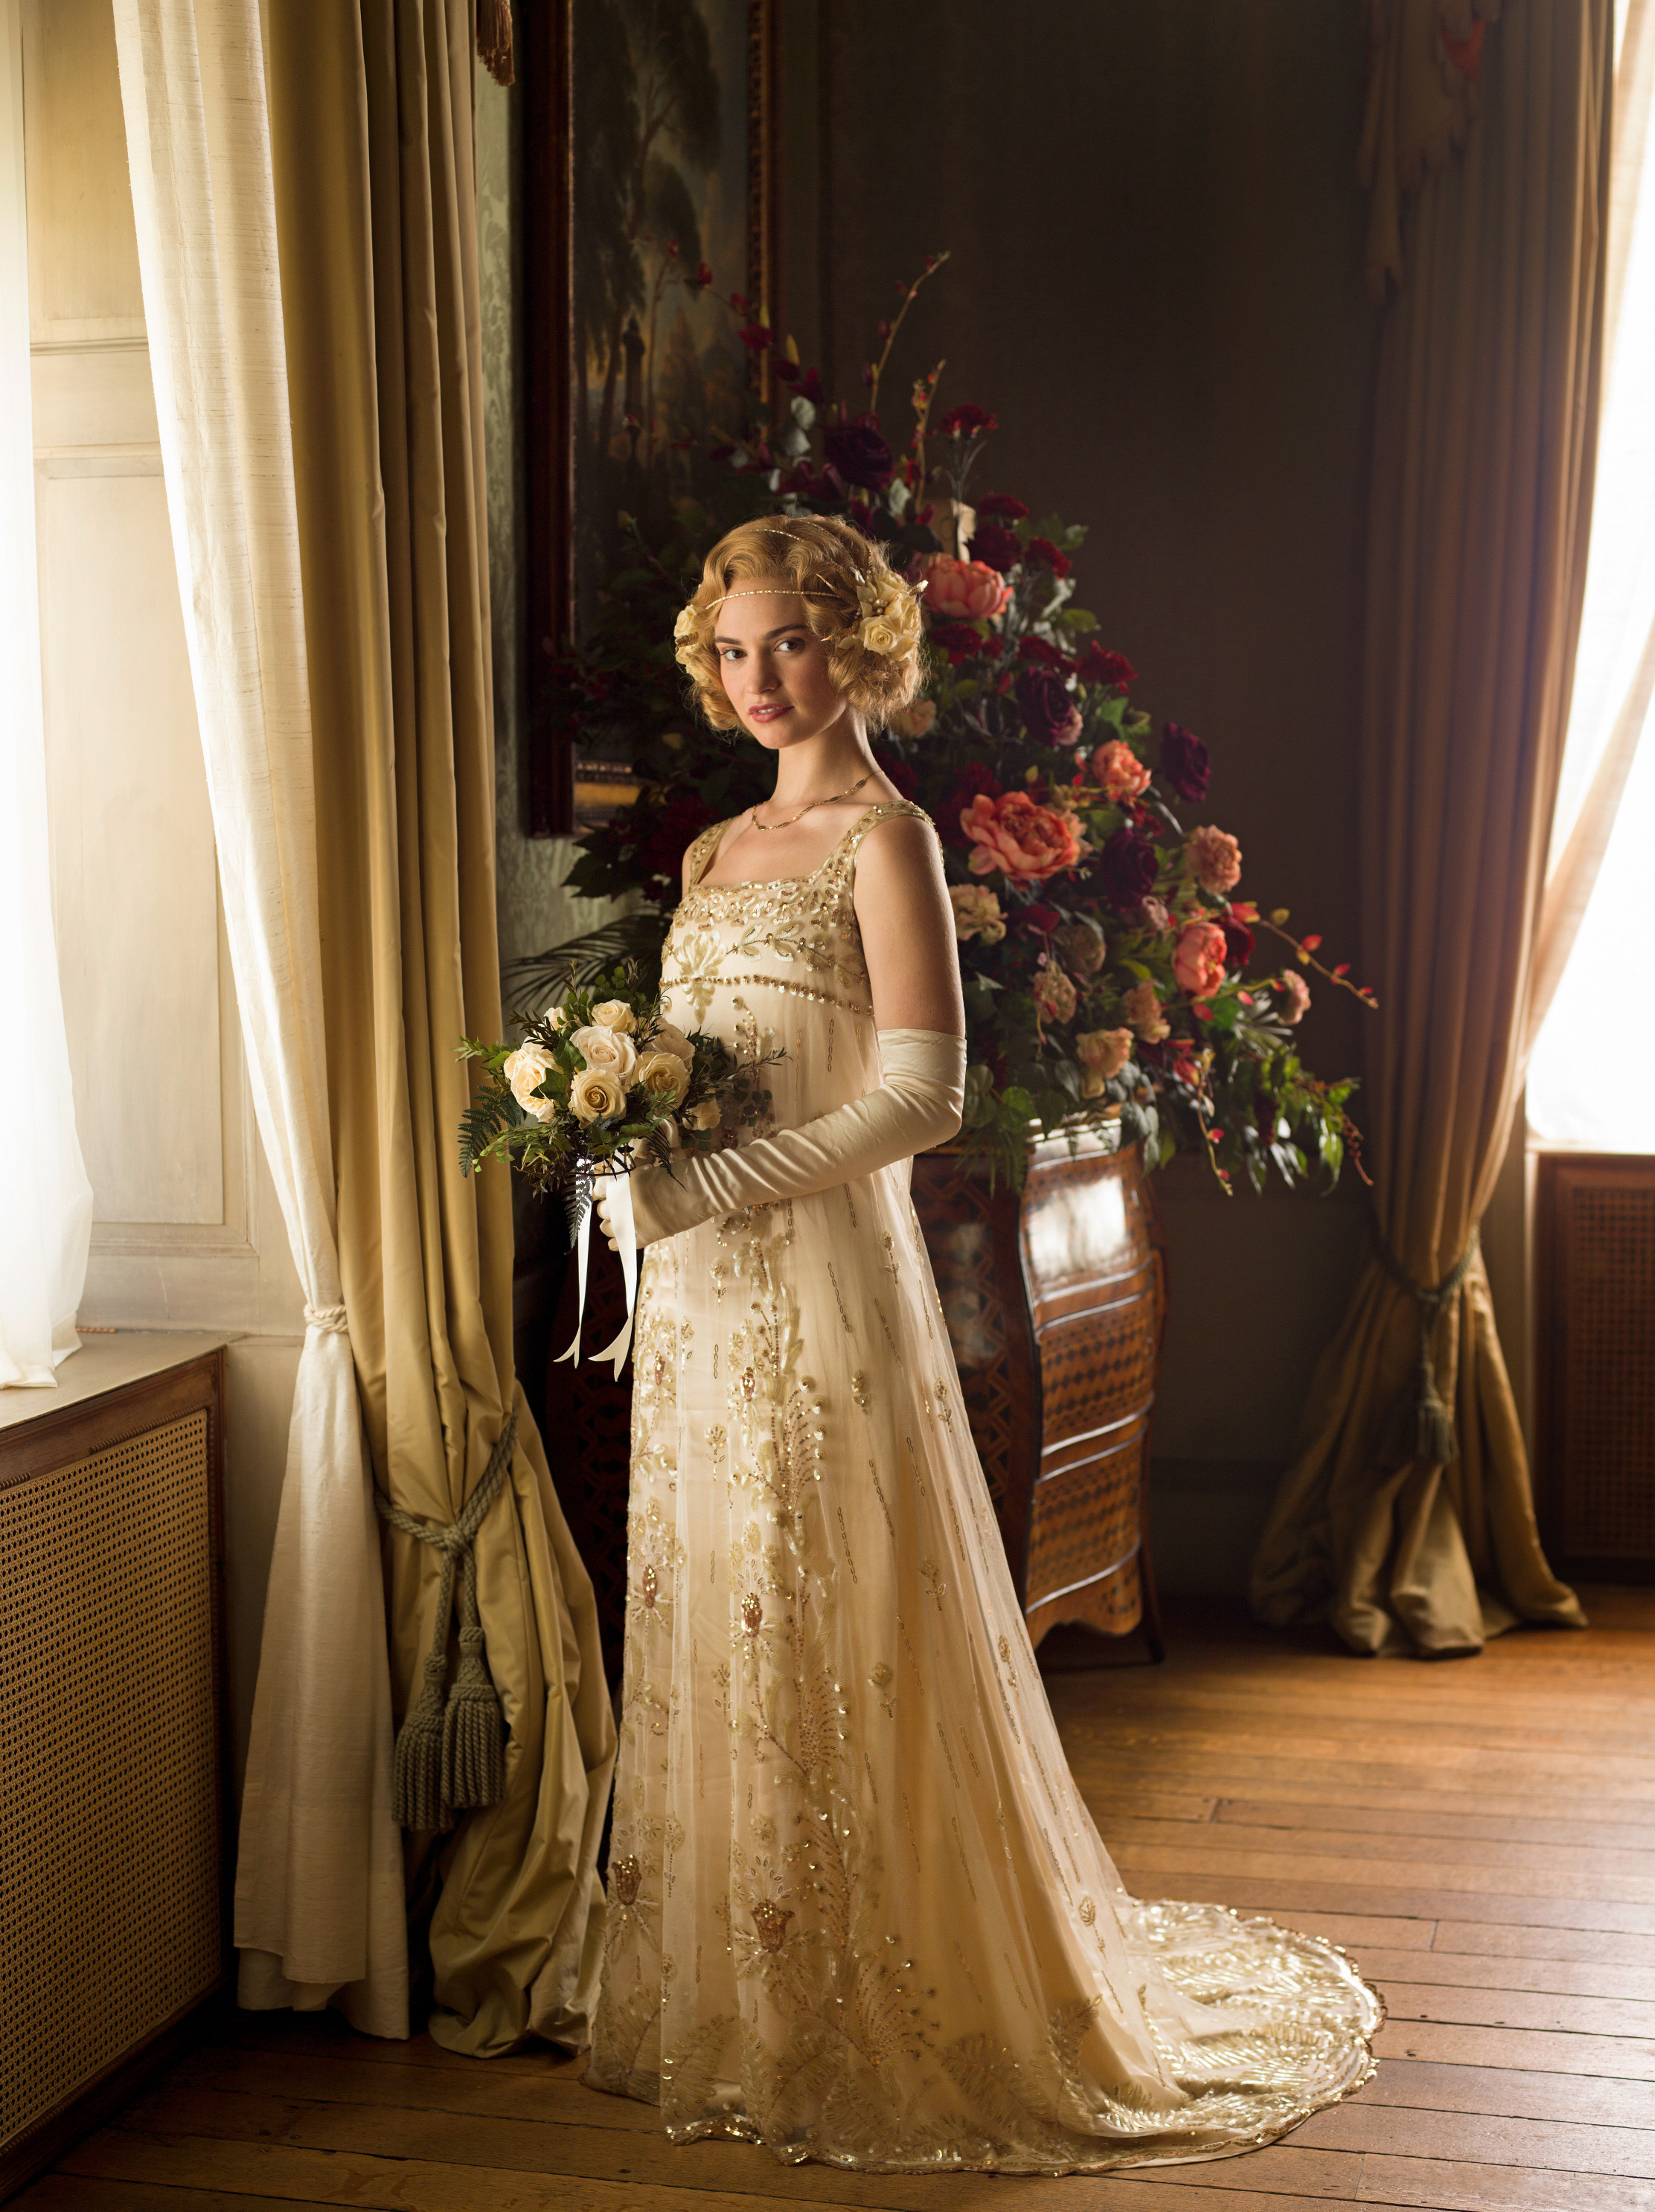 <p><span>Crawley cousin Lady Rose MacClare (played by Lily James) looked incredible in this beaded silk tulle gown that she wore to marry Atticus Aldridge on season 5 of "Downton Abbey." </span></p><p>"It was just a ghost of a dress, and I stumbled upon it," costumer designer Anna Mary Scott Robbins told PBS of the nearly century-old gown -- a 1920s original. "A trader I'd made friends with has a little shop in London and he actually kept it in a box. It had never been worn, and we managed to give it this fairy-tale ending, this wedding dress that was a hundred years old and had never been worn."</p><p>MORE: <a href="https://www.wonderwall.com/style/fashion/royal-wedding-dresses-princess-diana-kate-middleton-more-3007376.gallery">Royal wedding dresses </a></p>